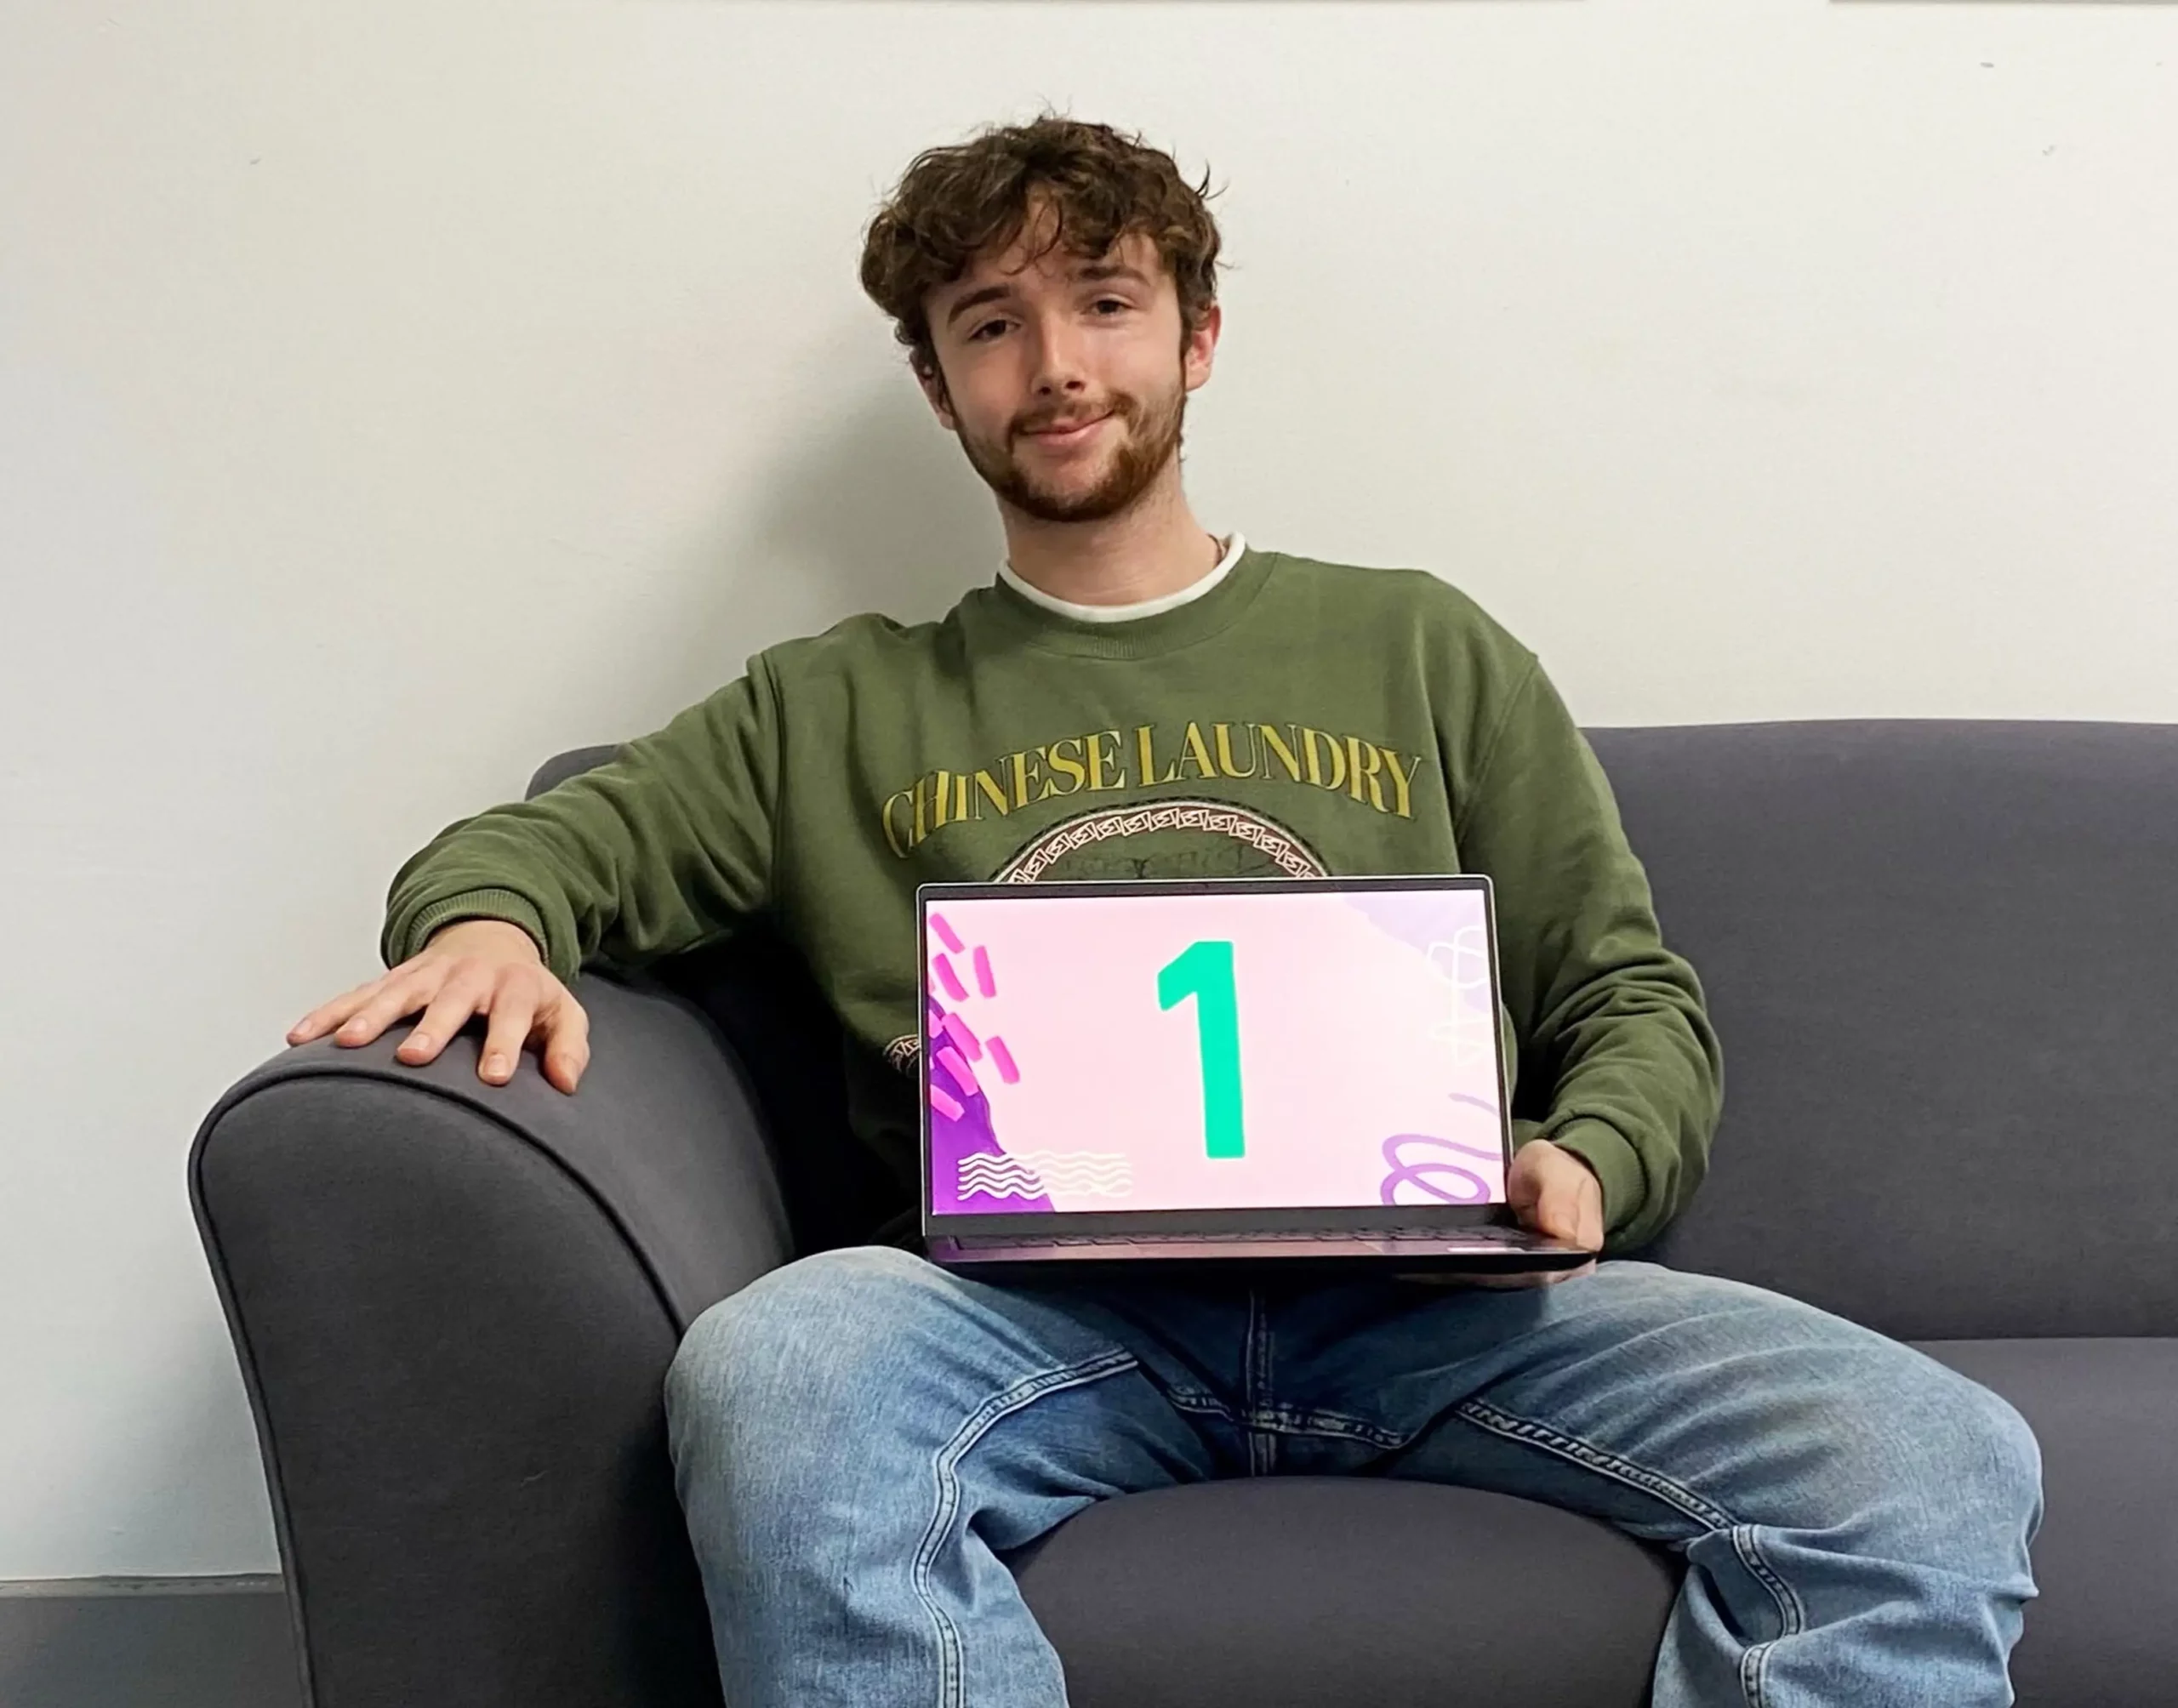 Toby is celebrating 1 year as a digital marketing apprentice at HBTC